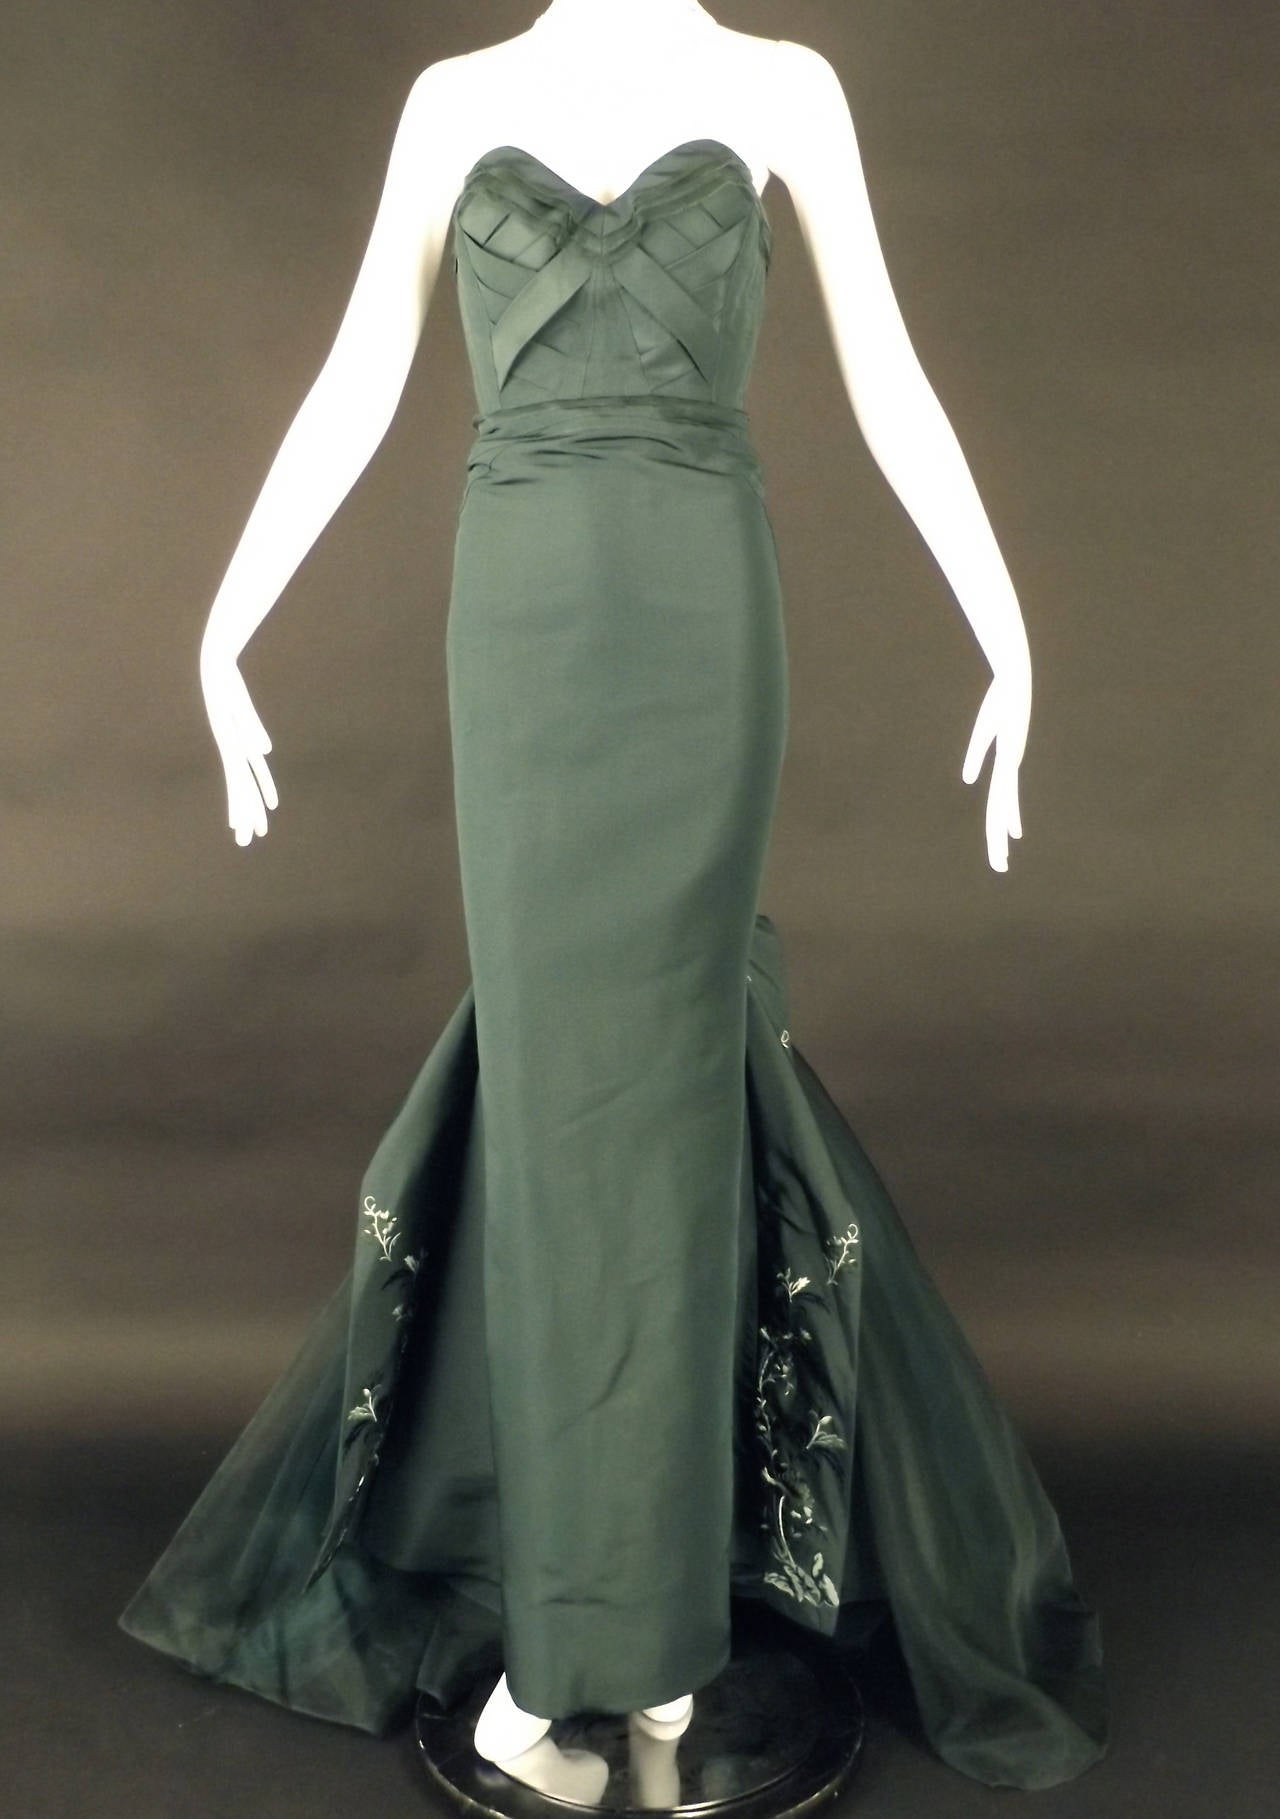 Stunning ball gown from the Fall, 2012 RTW collection. The gown is new with original Neiman Marcus tags still attached at a price of $8,990.00.  The silk faille, forest green gown has an incredible, dart fitted and architecturally designed bodice.